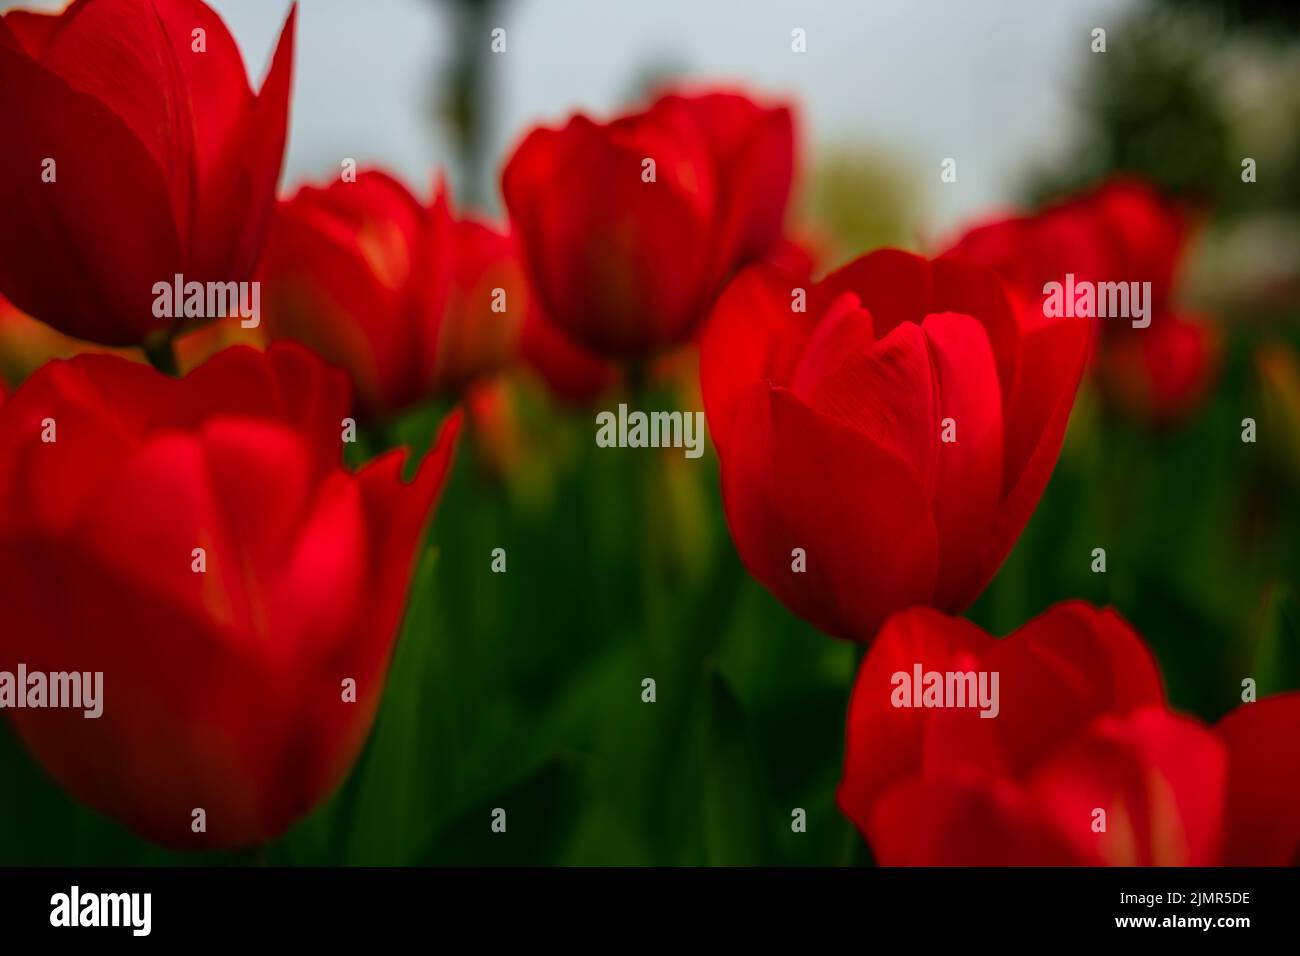 Red tulips. Printable or canvas print tulip photo. Spring blossom background. Stock Photo